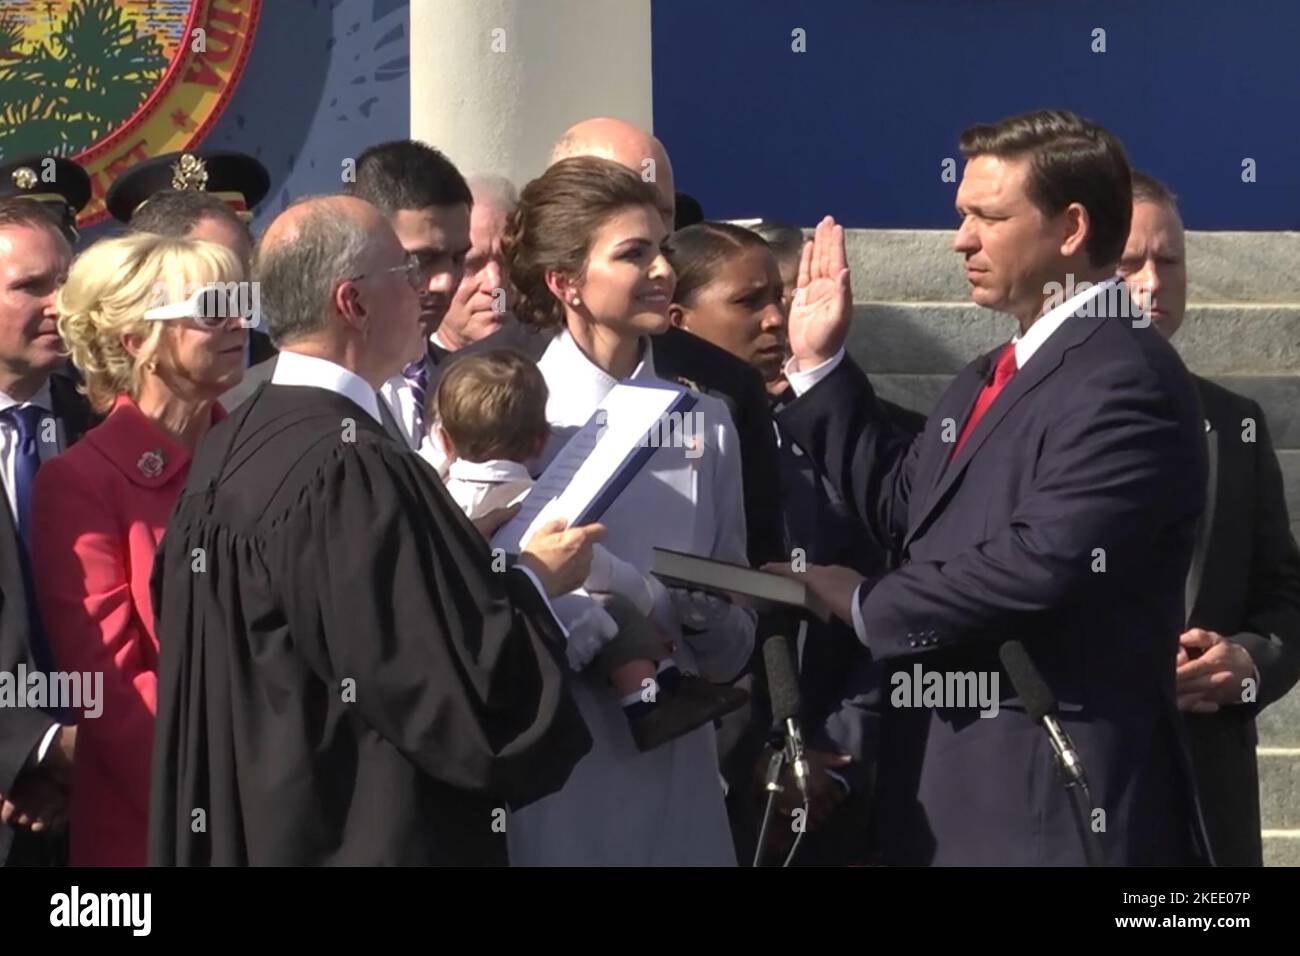 Florida Governor Ron DeSantis, accompanied by First Lady Casey DeSantis, is sworn in as Florida' 46th Governor on January 8, 2019, in Tallahassee, Florida. (USA) Stock Photo